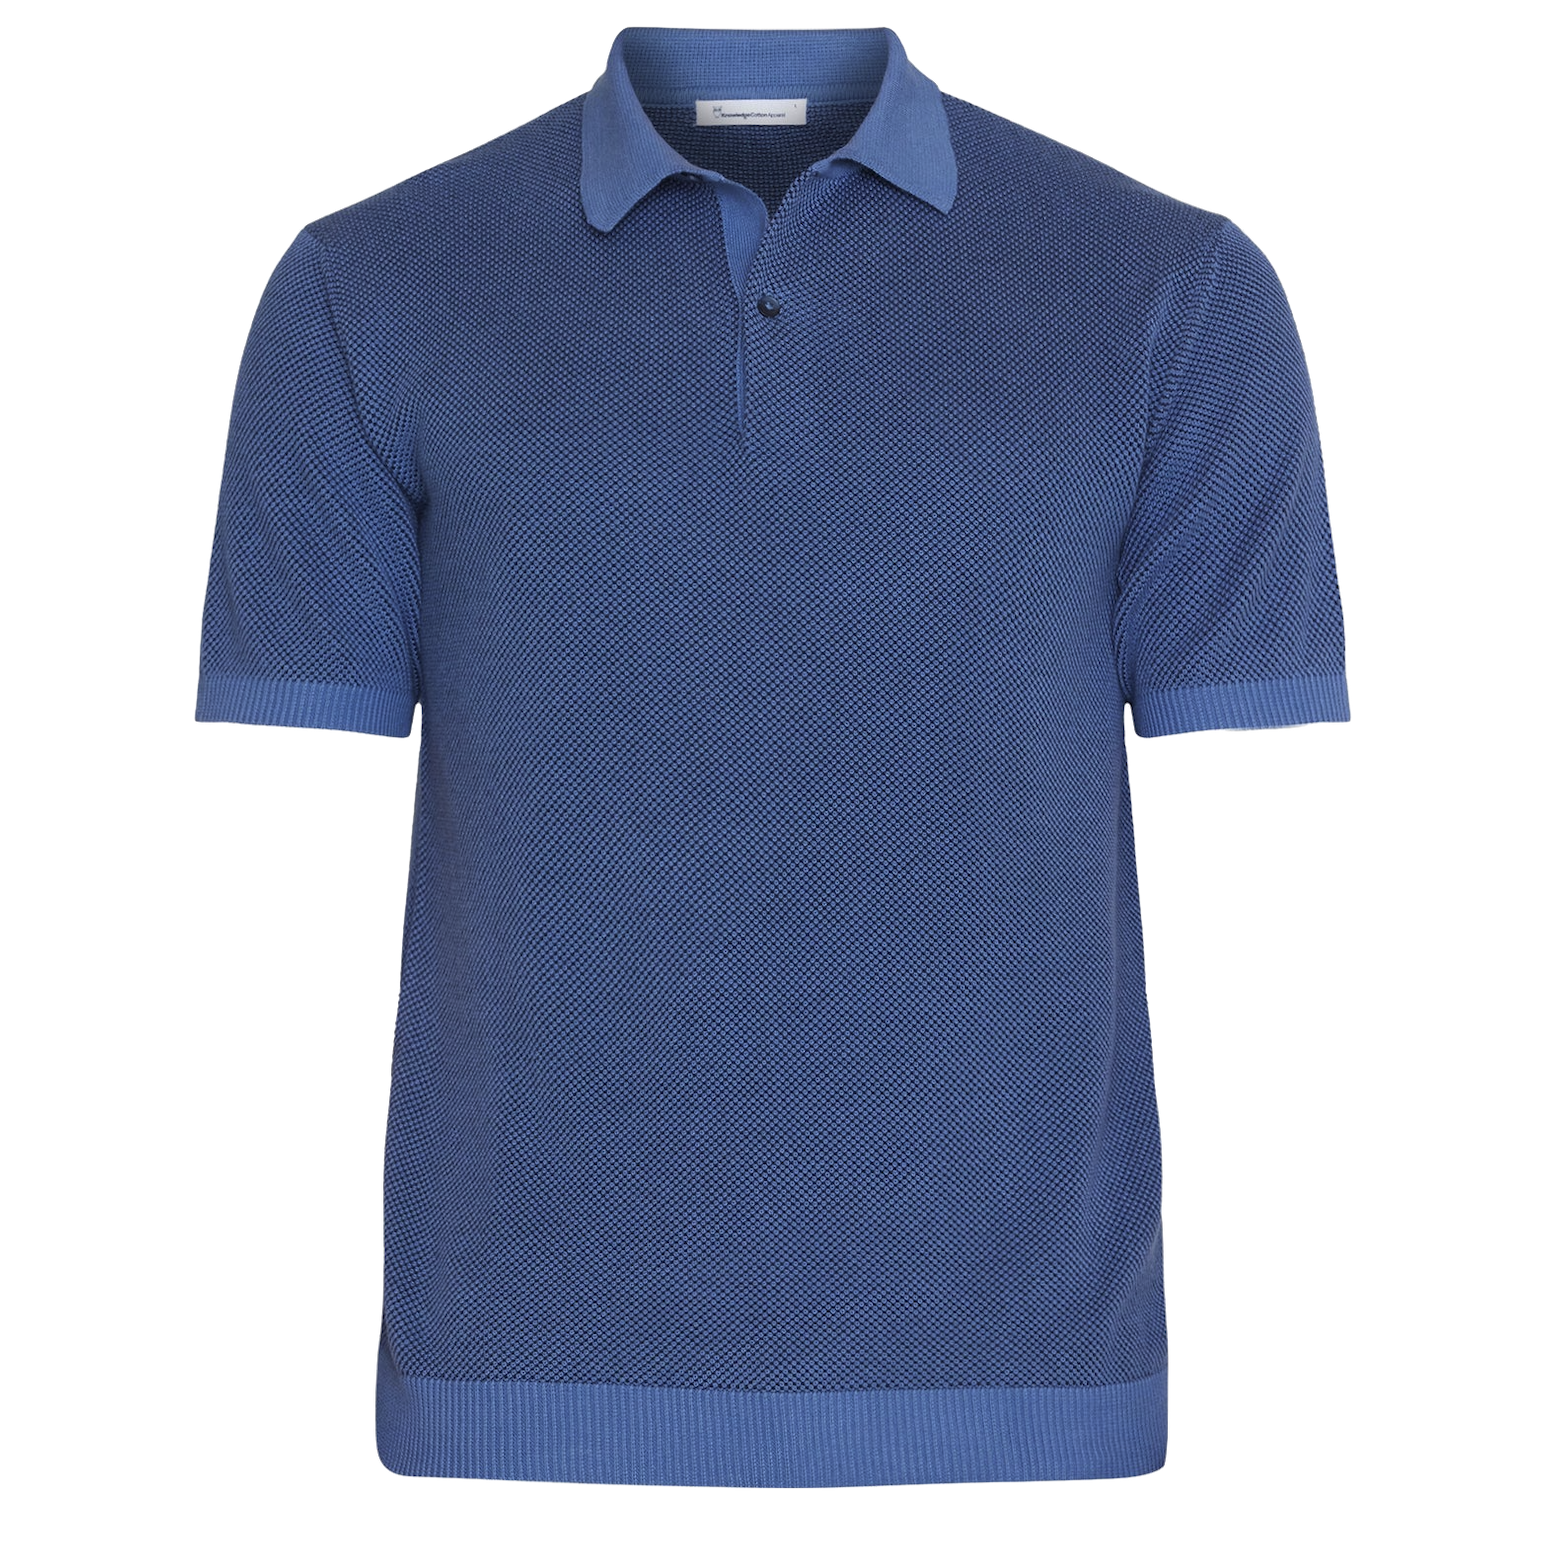 KnowledgeCotton Apparel KnowledgeCotton, Two Tone Polo, moonlight blue, S